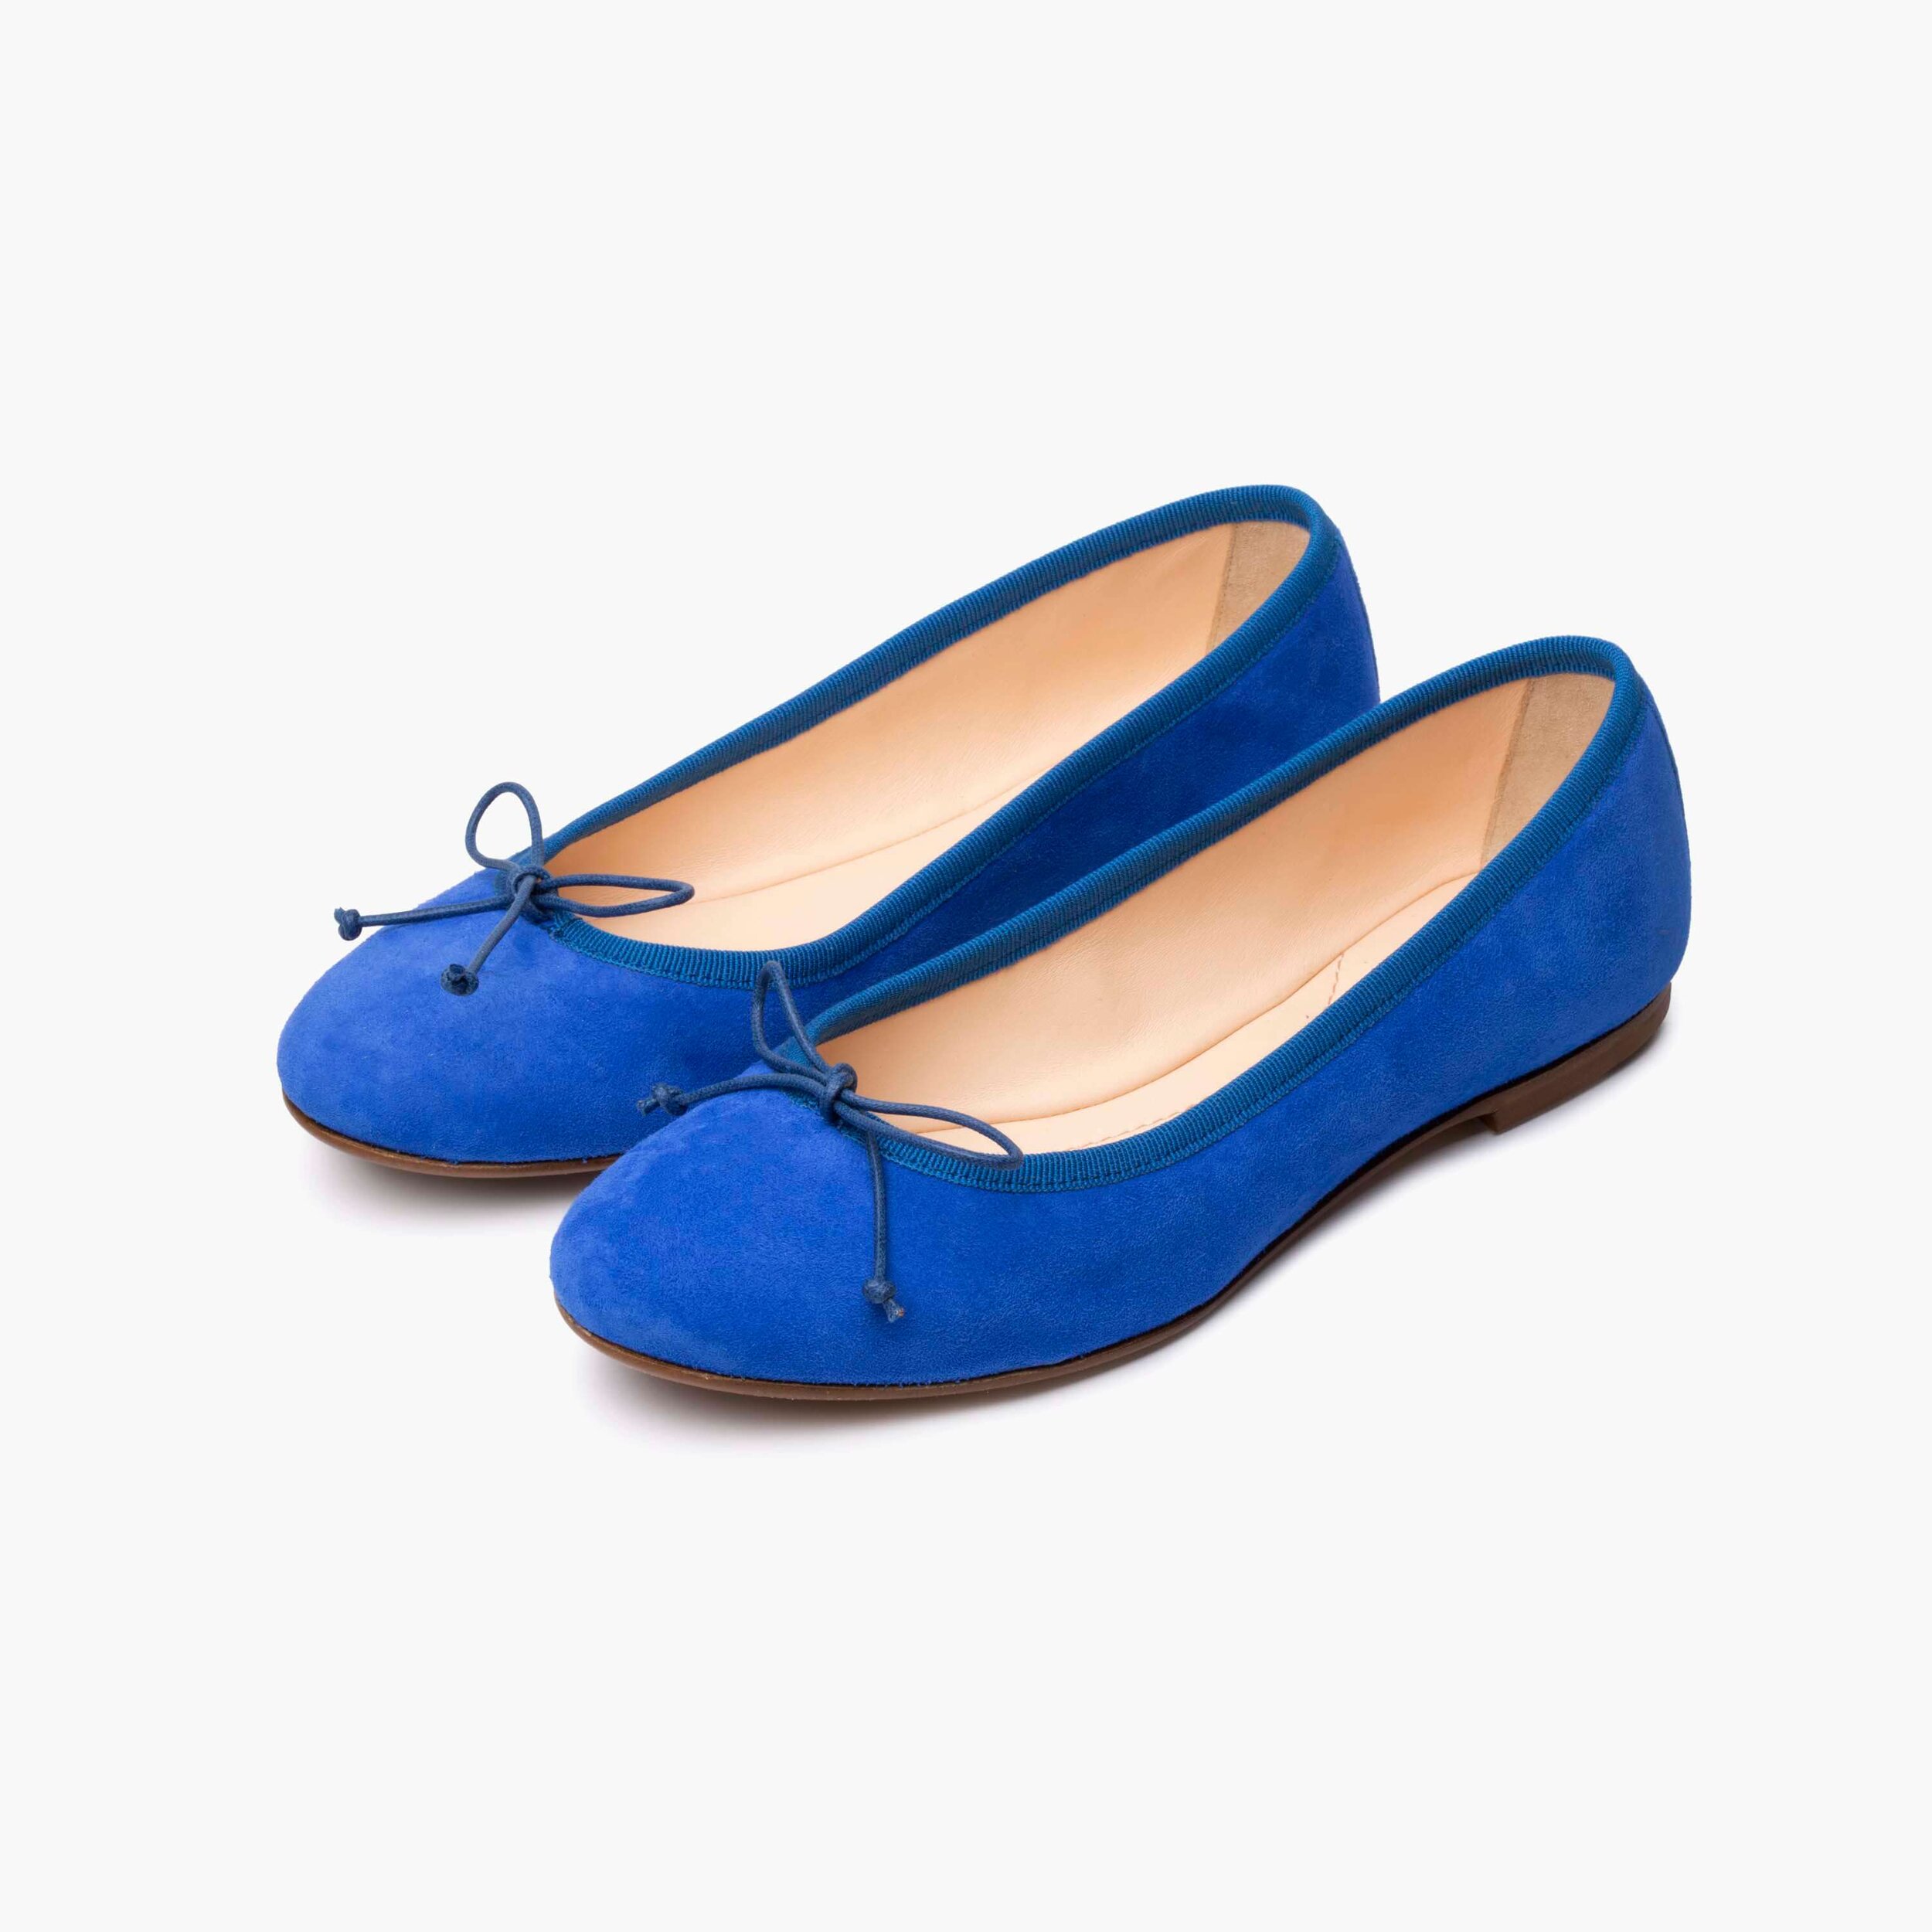 Buy > blue shoes flats > in stock